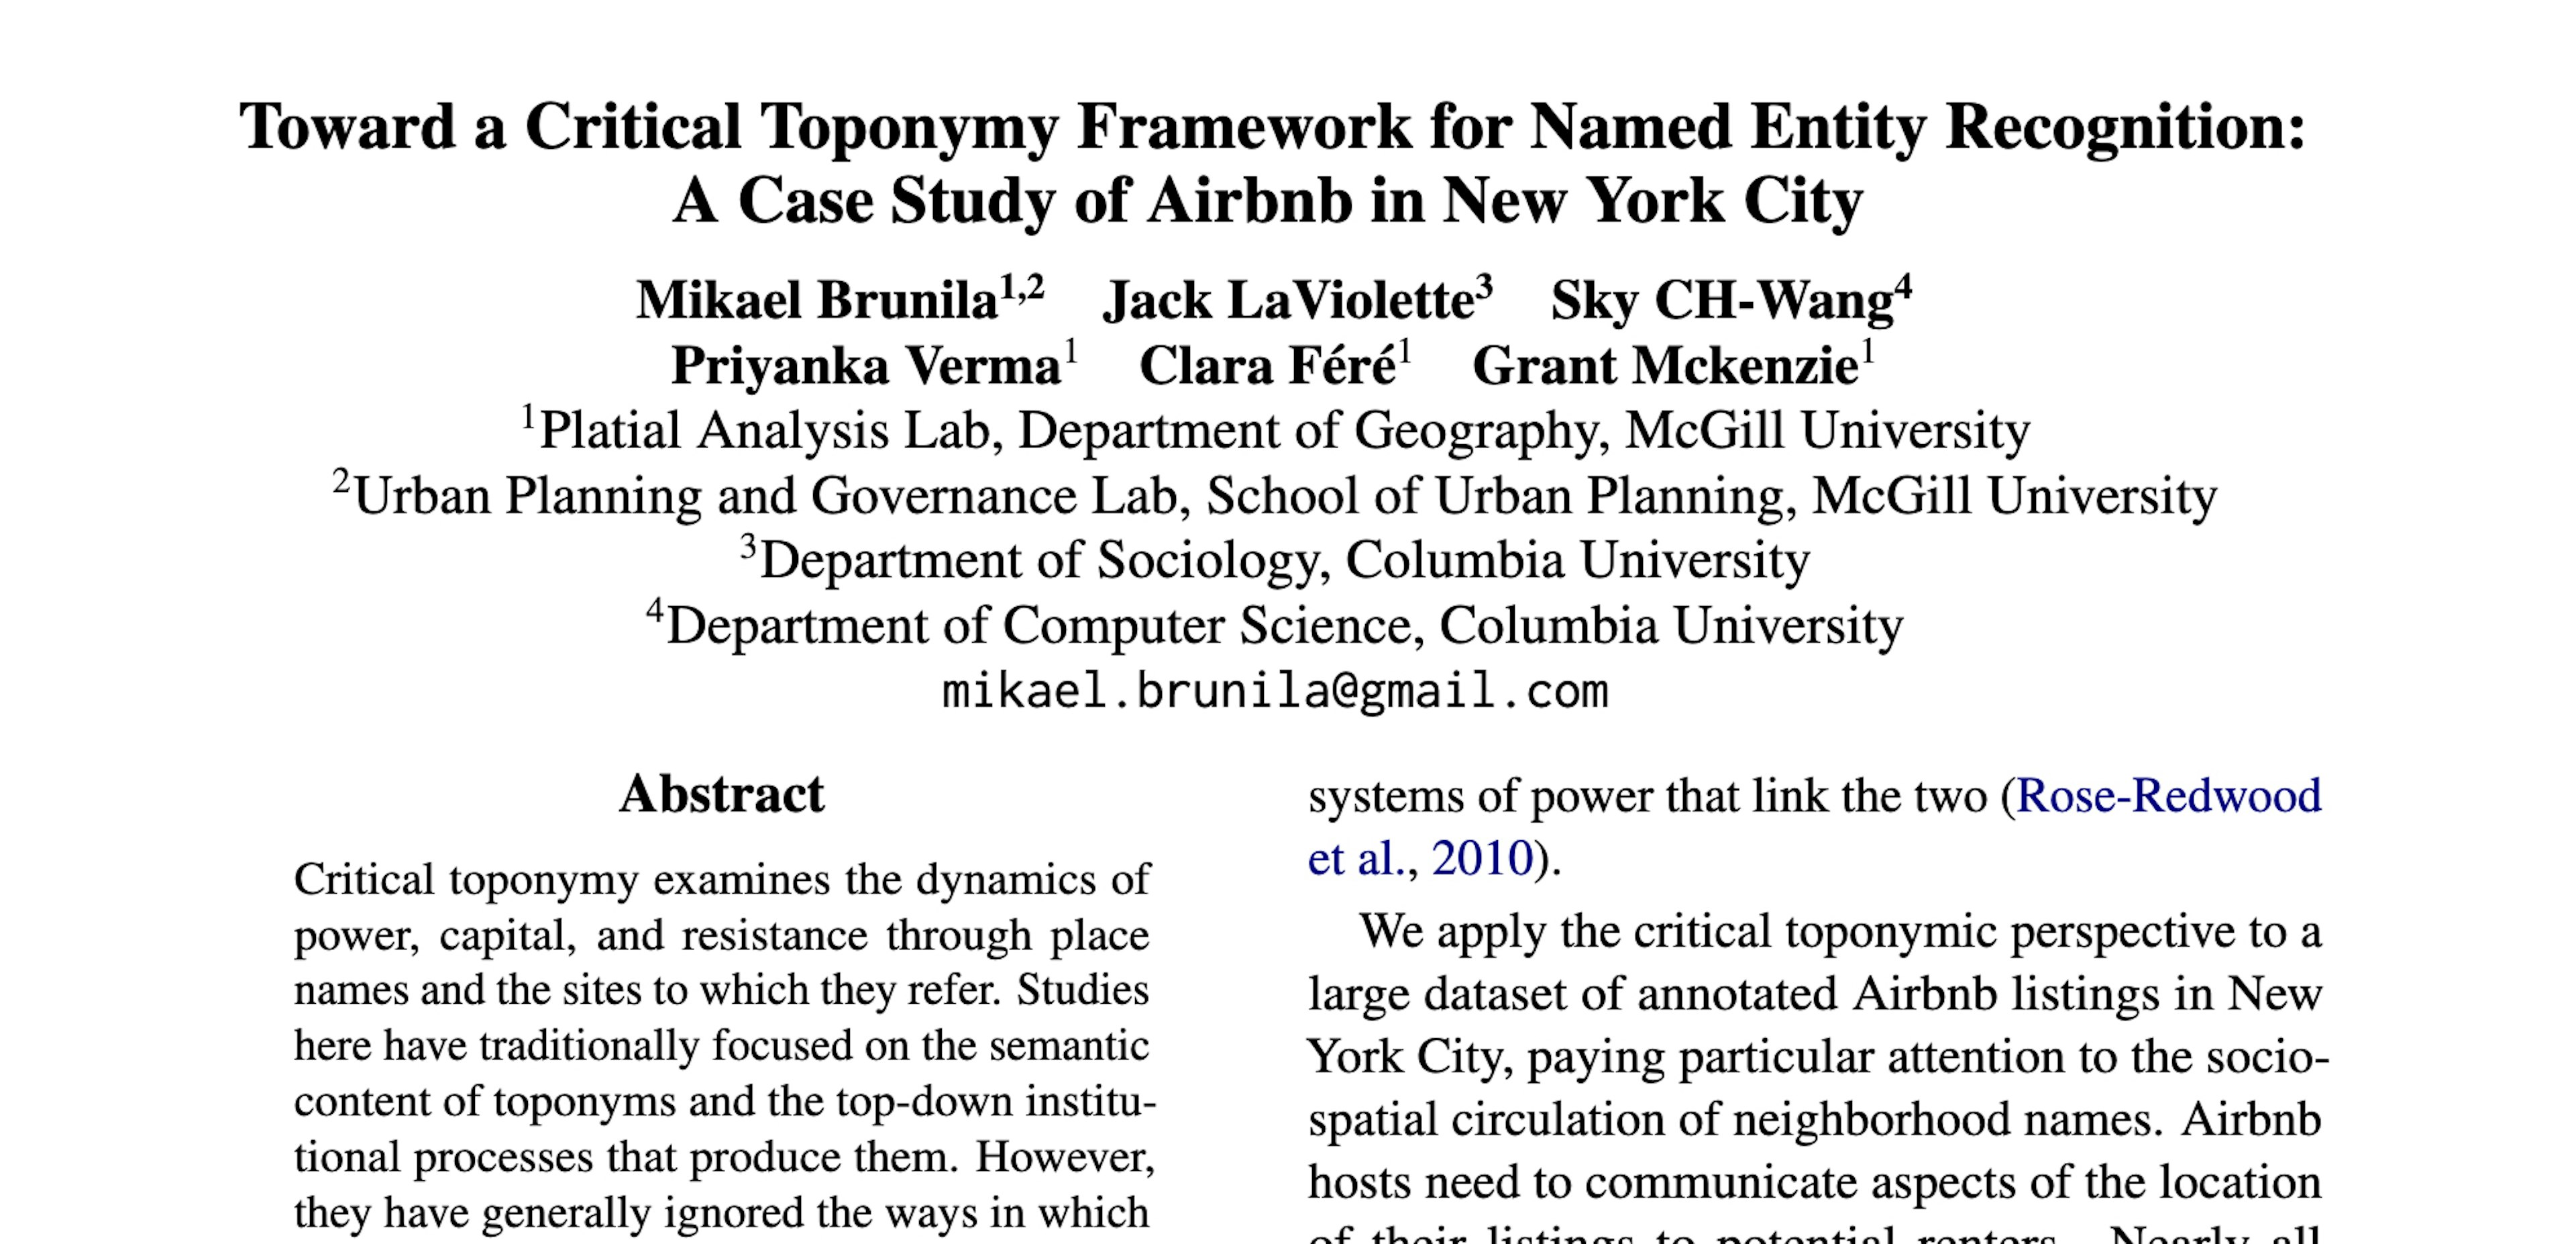 Toward a Critical Toponymy Framework for Named Entity Recognition: A Case Study of Airbnb in New York City